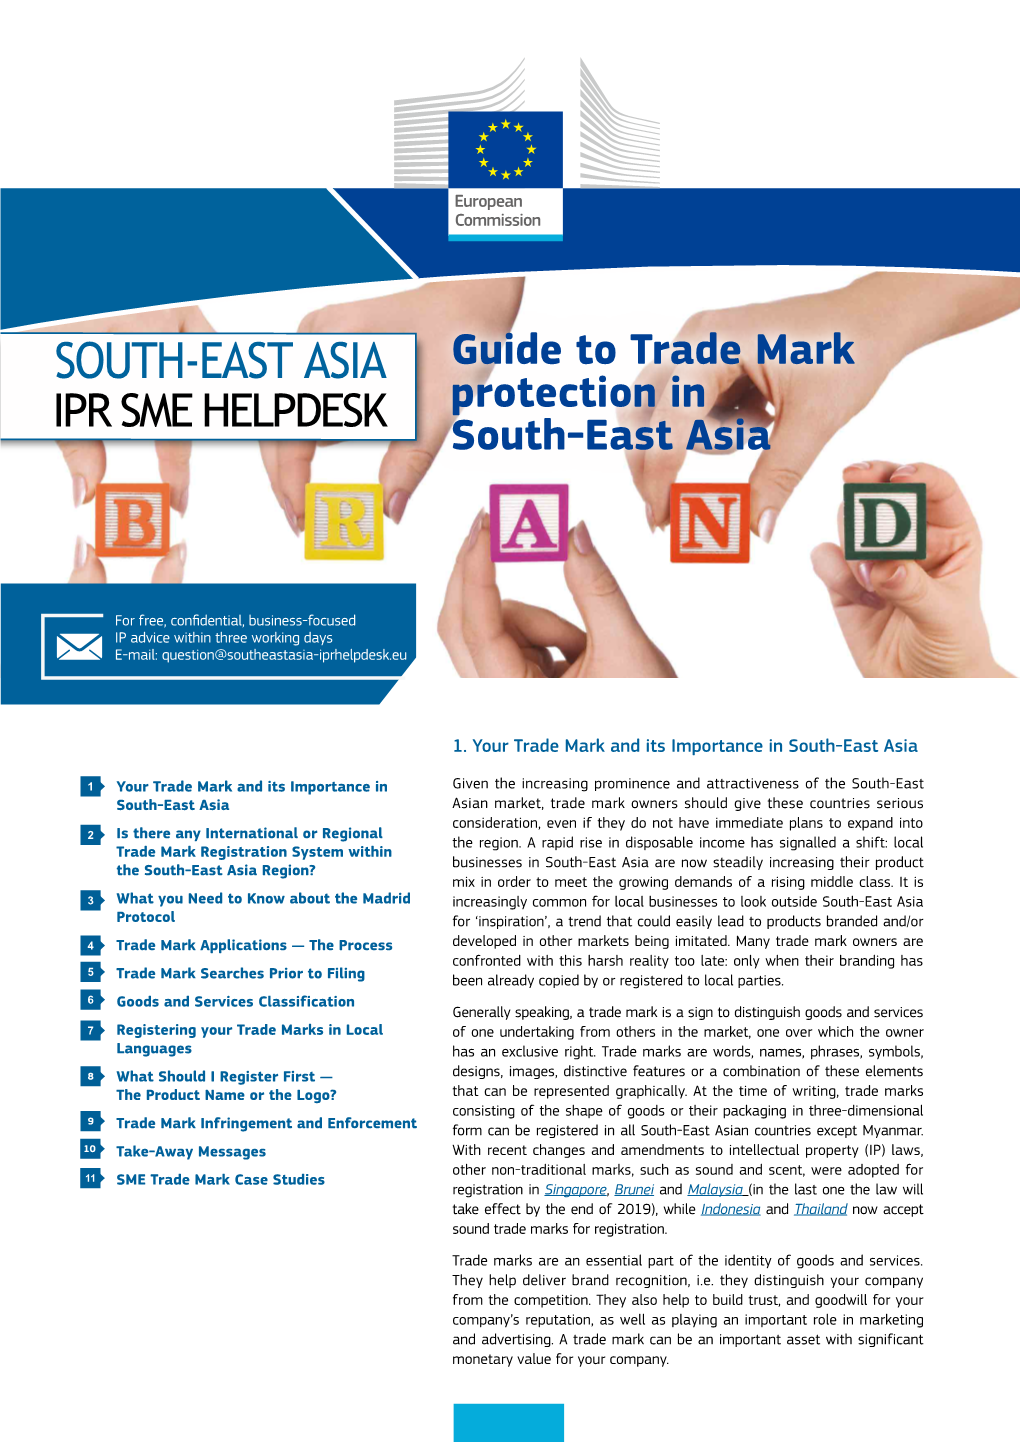 Guide to Trade Mark Protection in South-East Asia